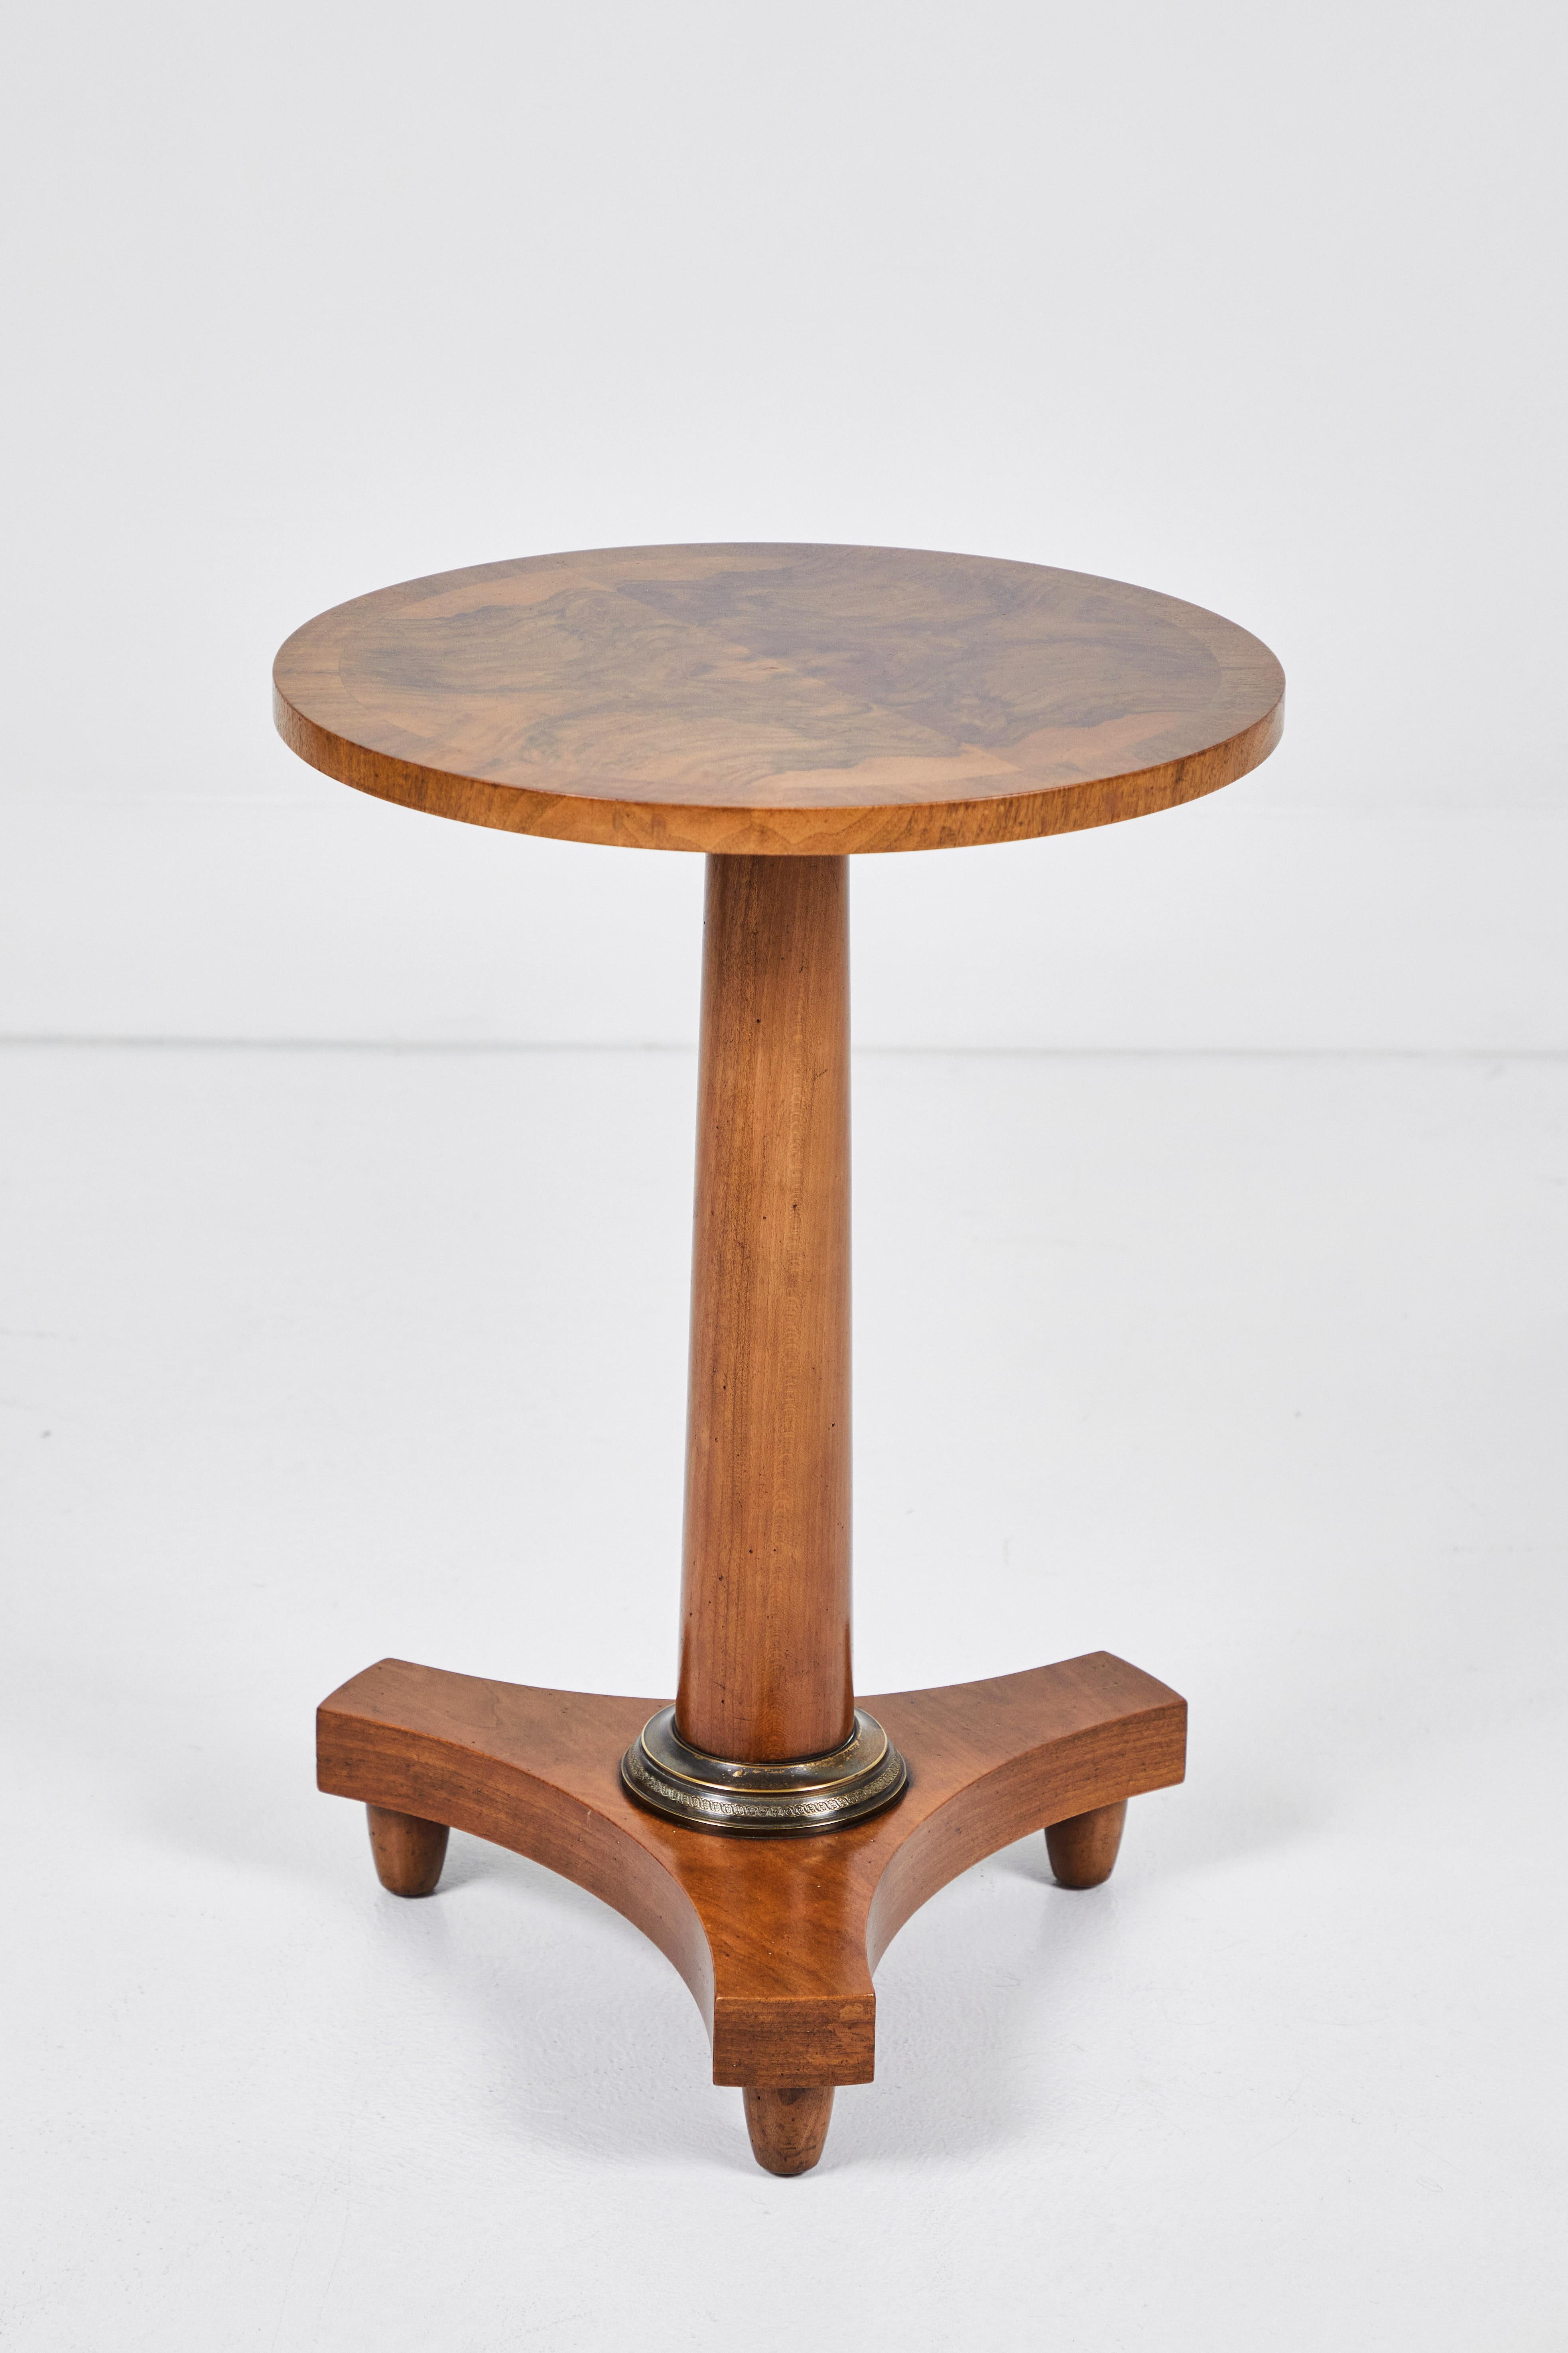 Empire Revival Empire Style Occasional Table with Brass Detail by Baker Furniture